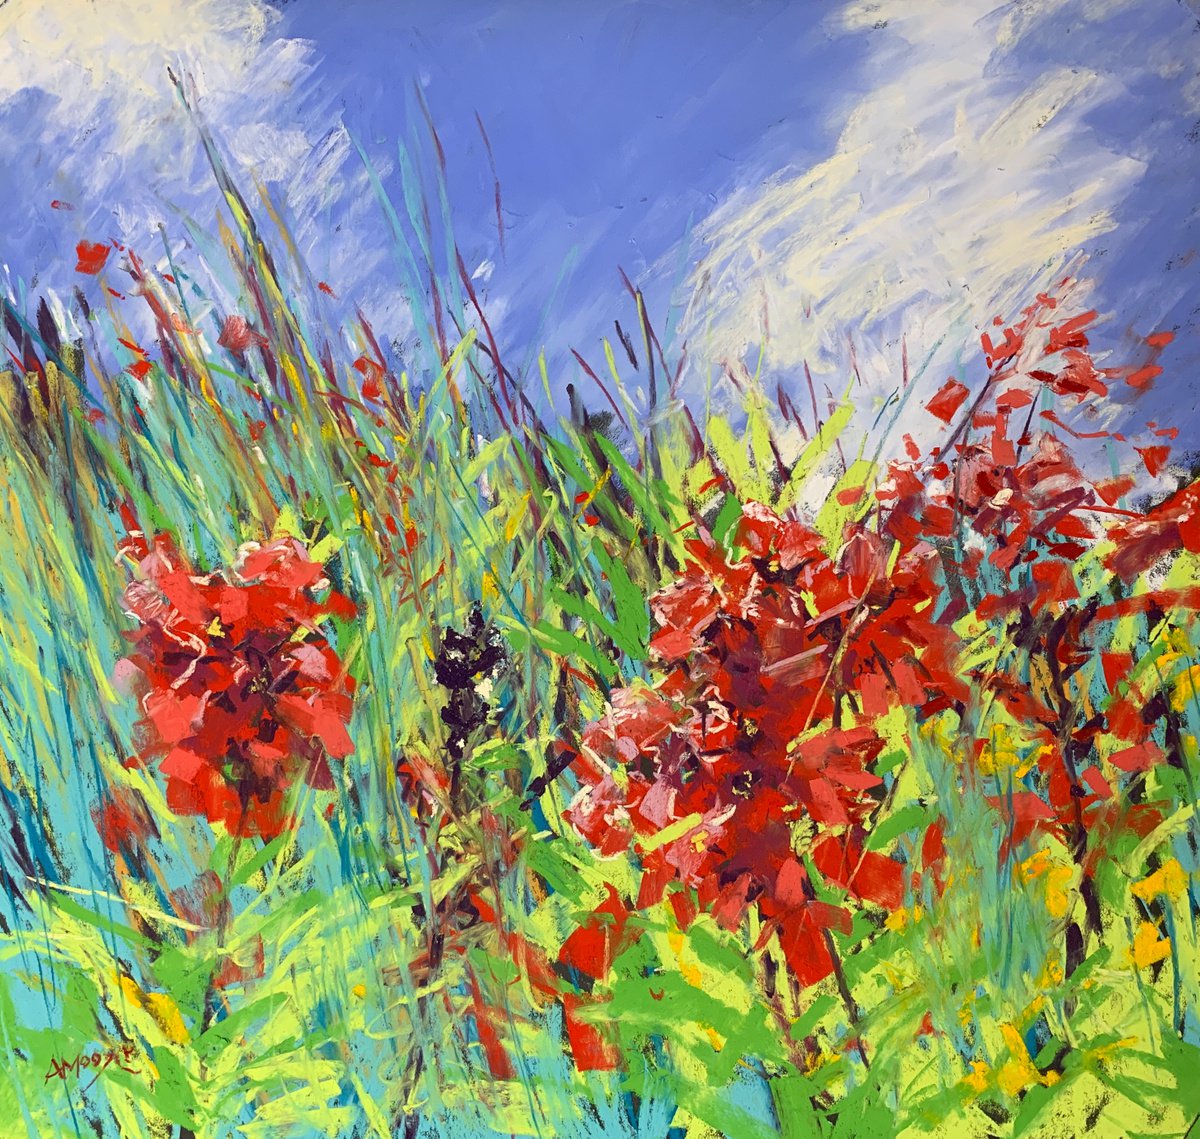 Phlox and Grasses by Andrew Moodie